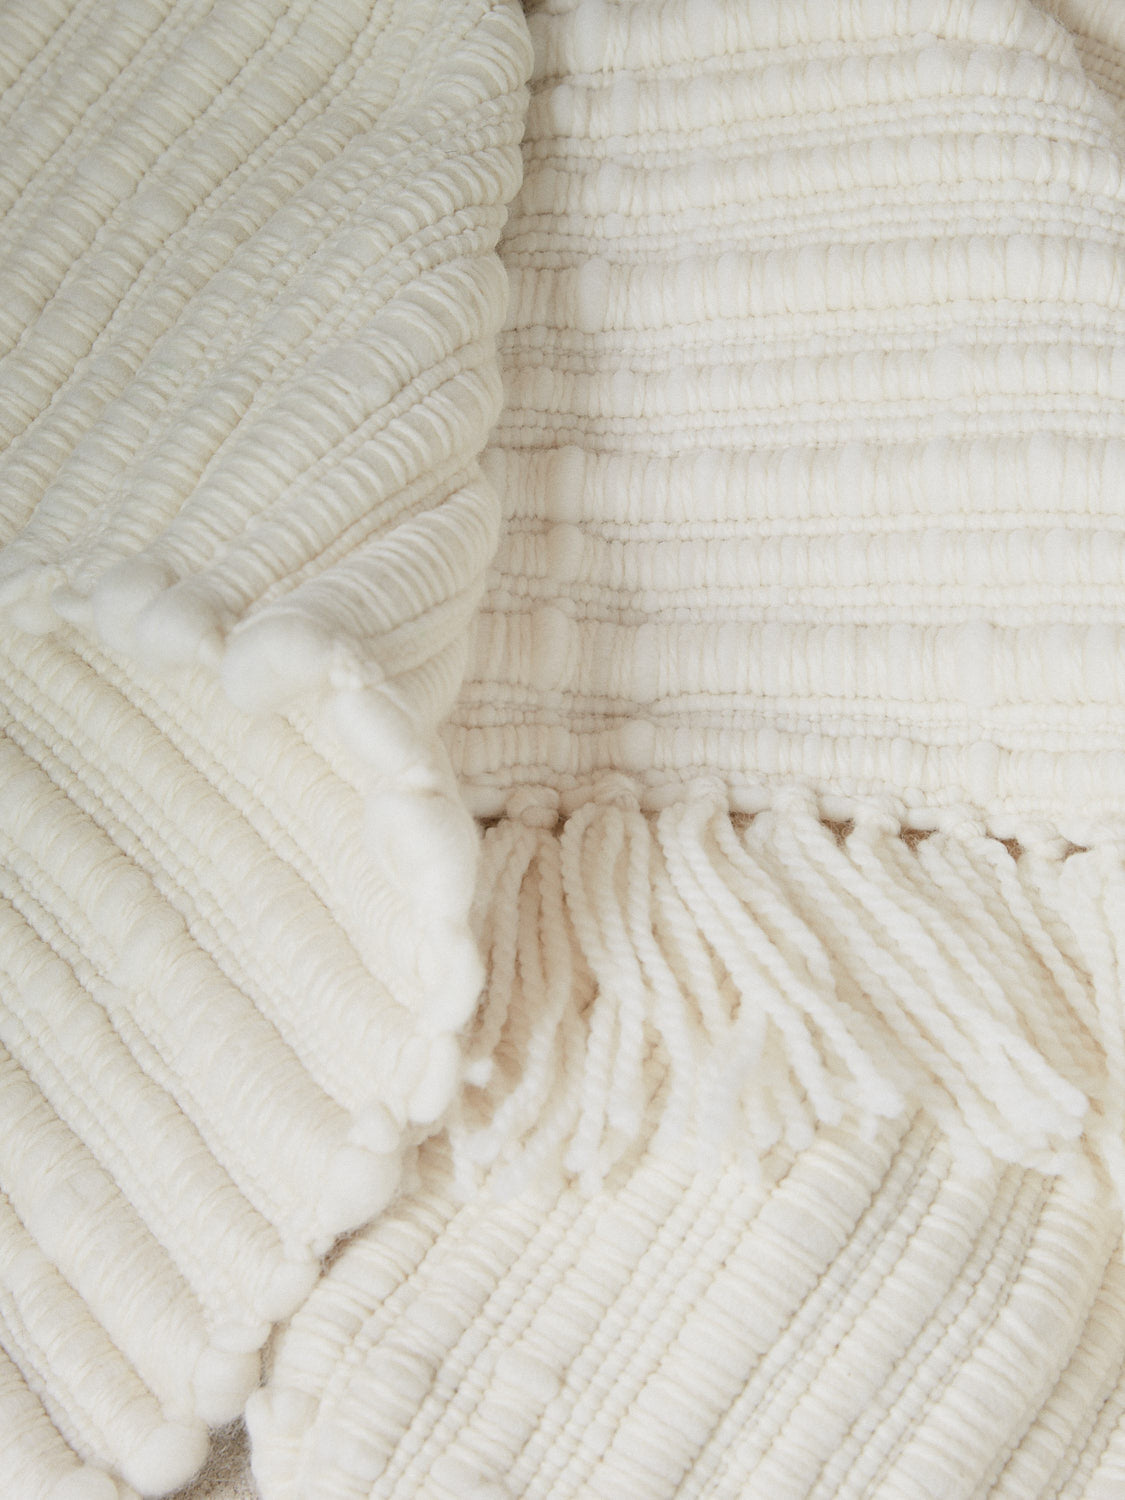 Aspen Blanket. A substantial, tactile and weighty statement throw blanket hand spun from the softest merino wool in an elegant, neutral cream color.